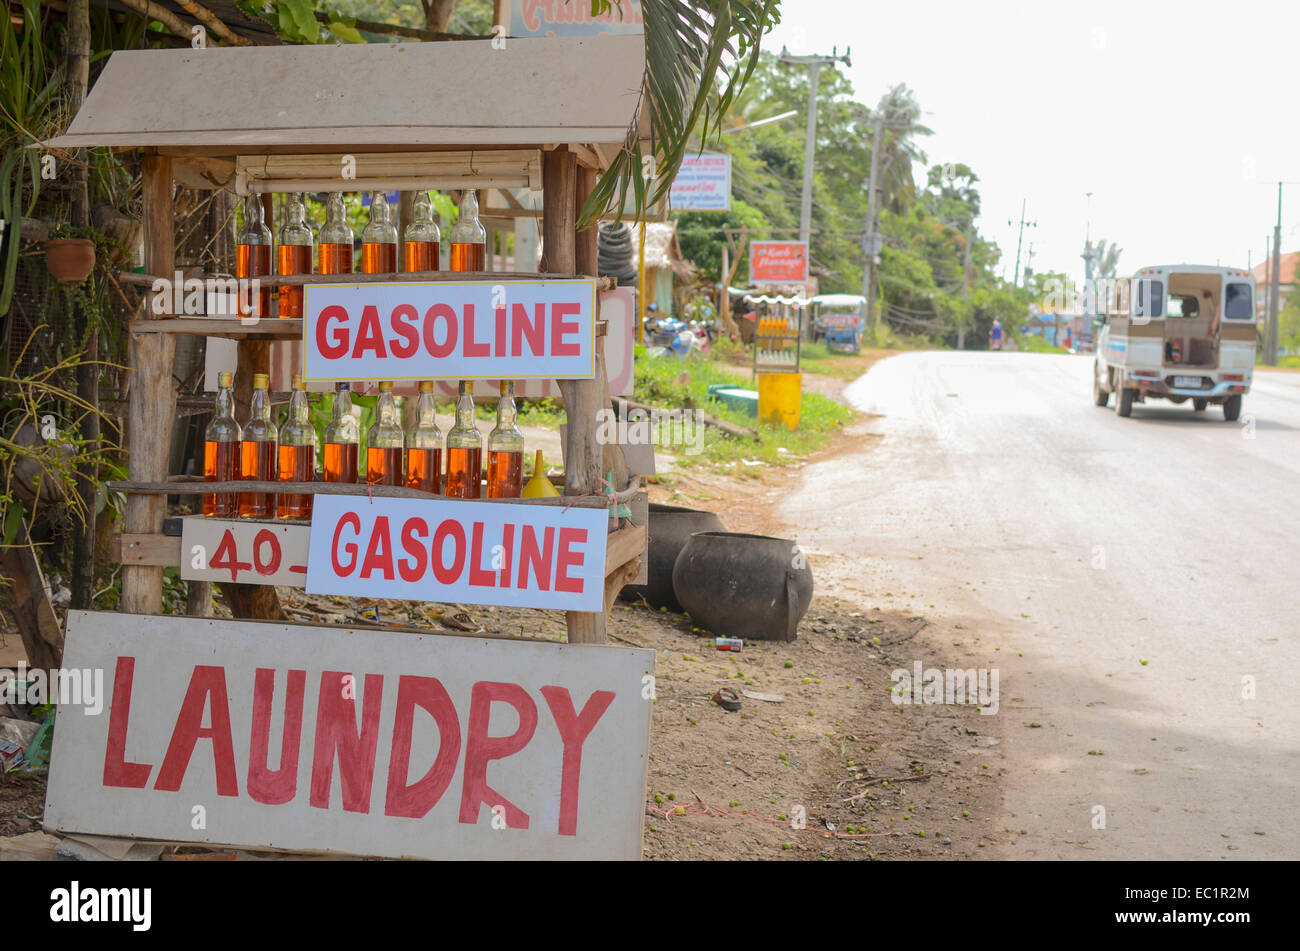 Thai roadside service station with gasoline bottles for sale and laundry sign, Koh Lanta, Thailand Stock Photo